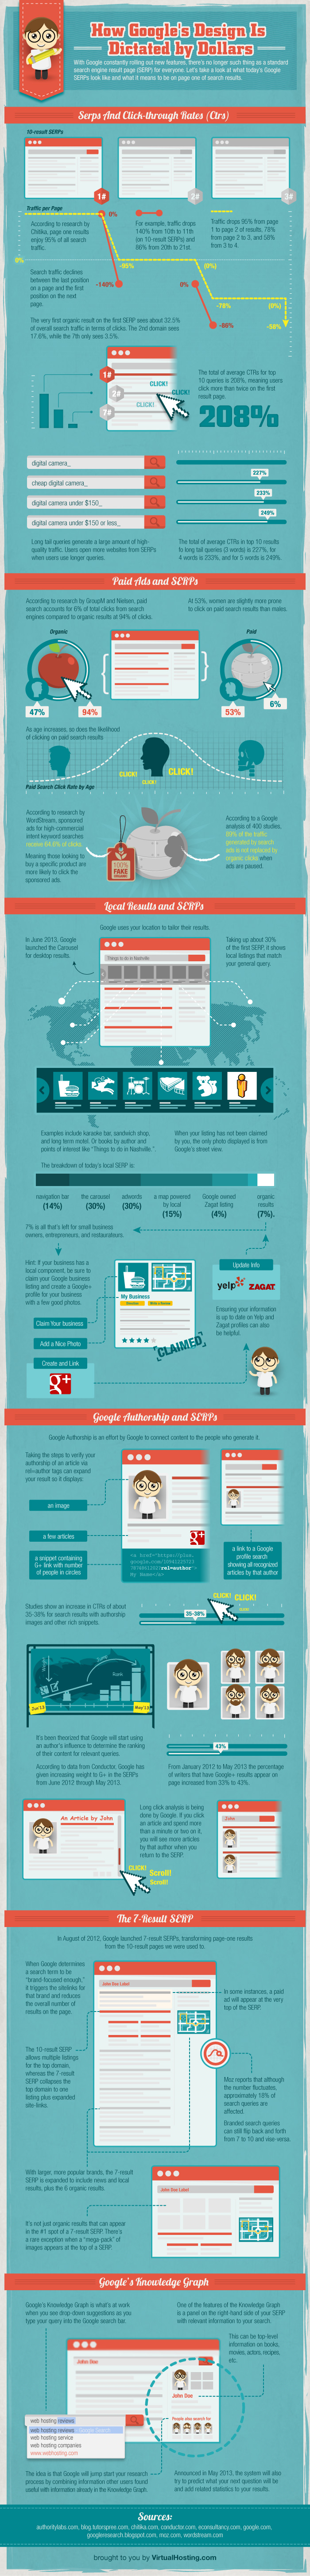 How Google’s Design is Dictated by Dollars [Infographic] by Virtual Hosting